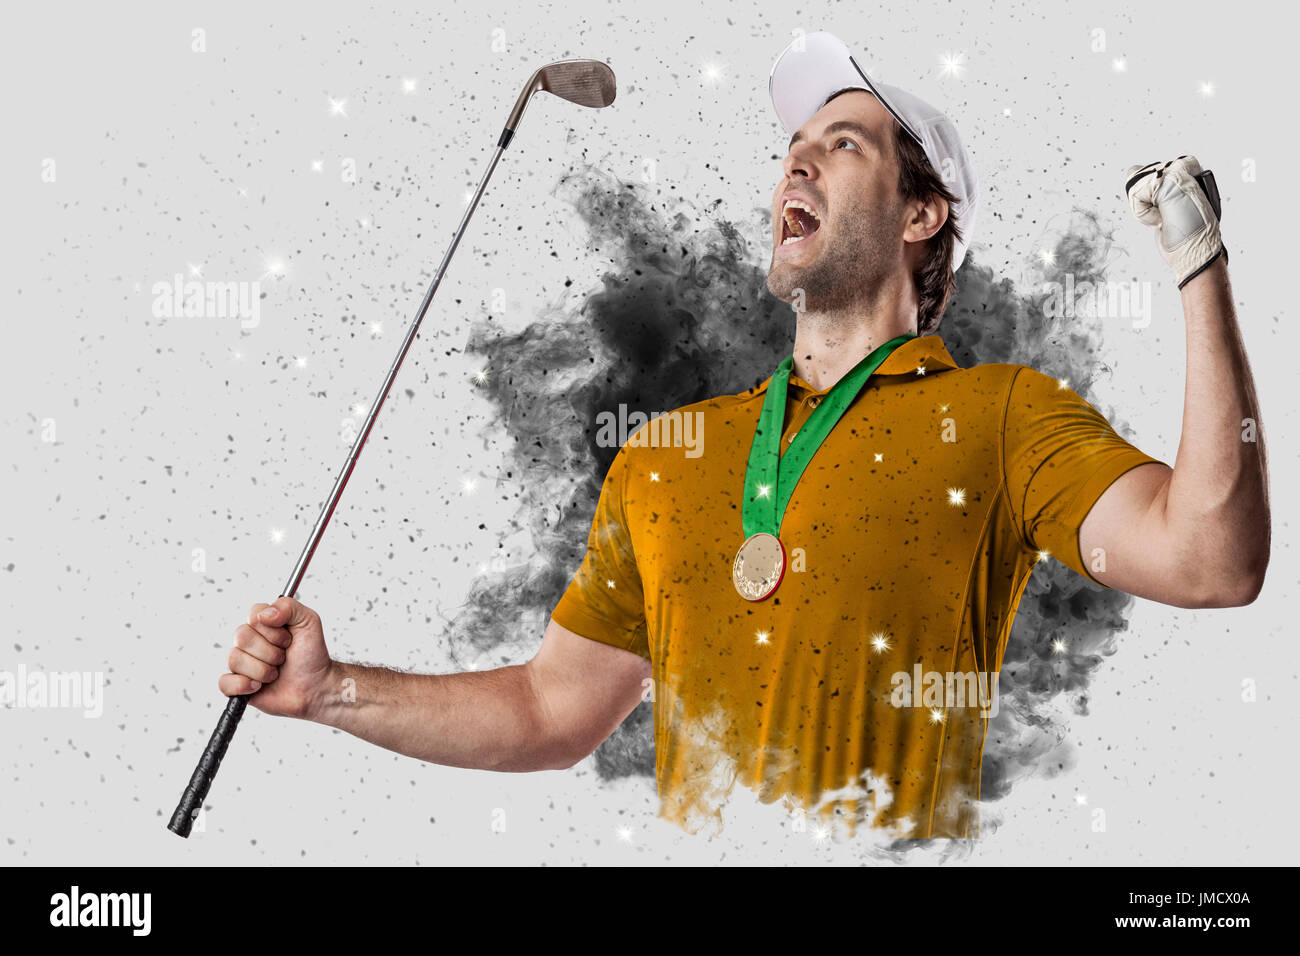 Golf Player with a orange uniform coming out of a blast of smoke . Stock Photo